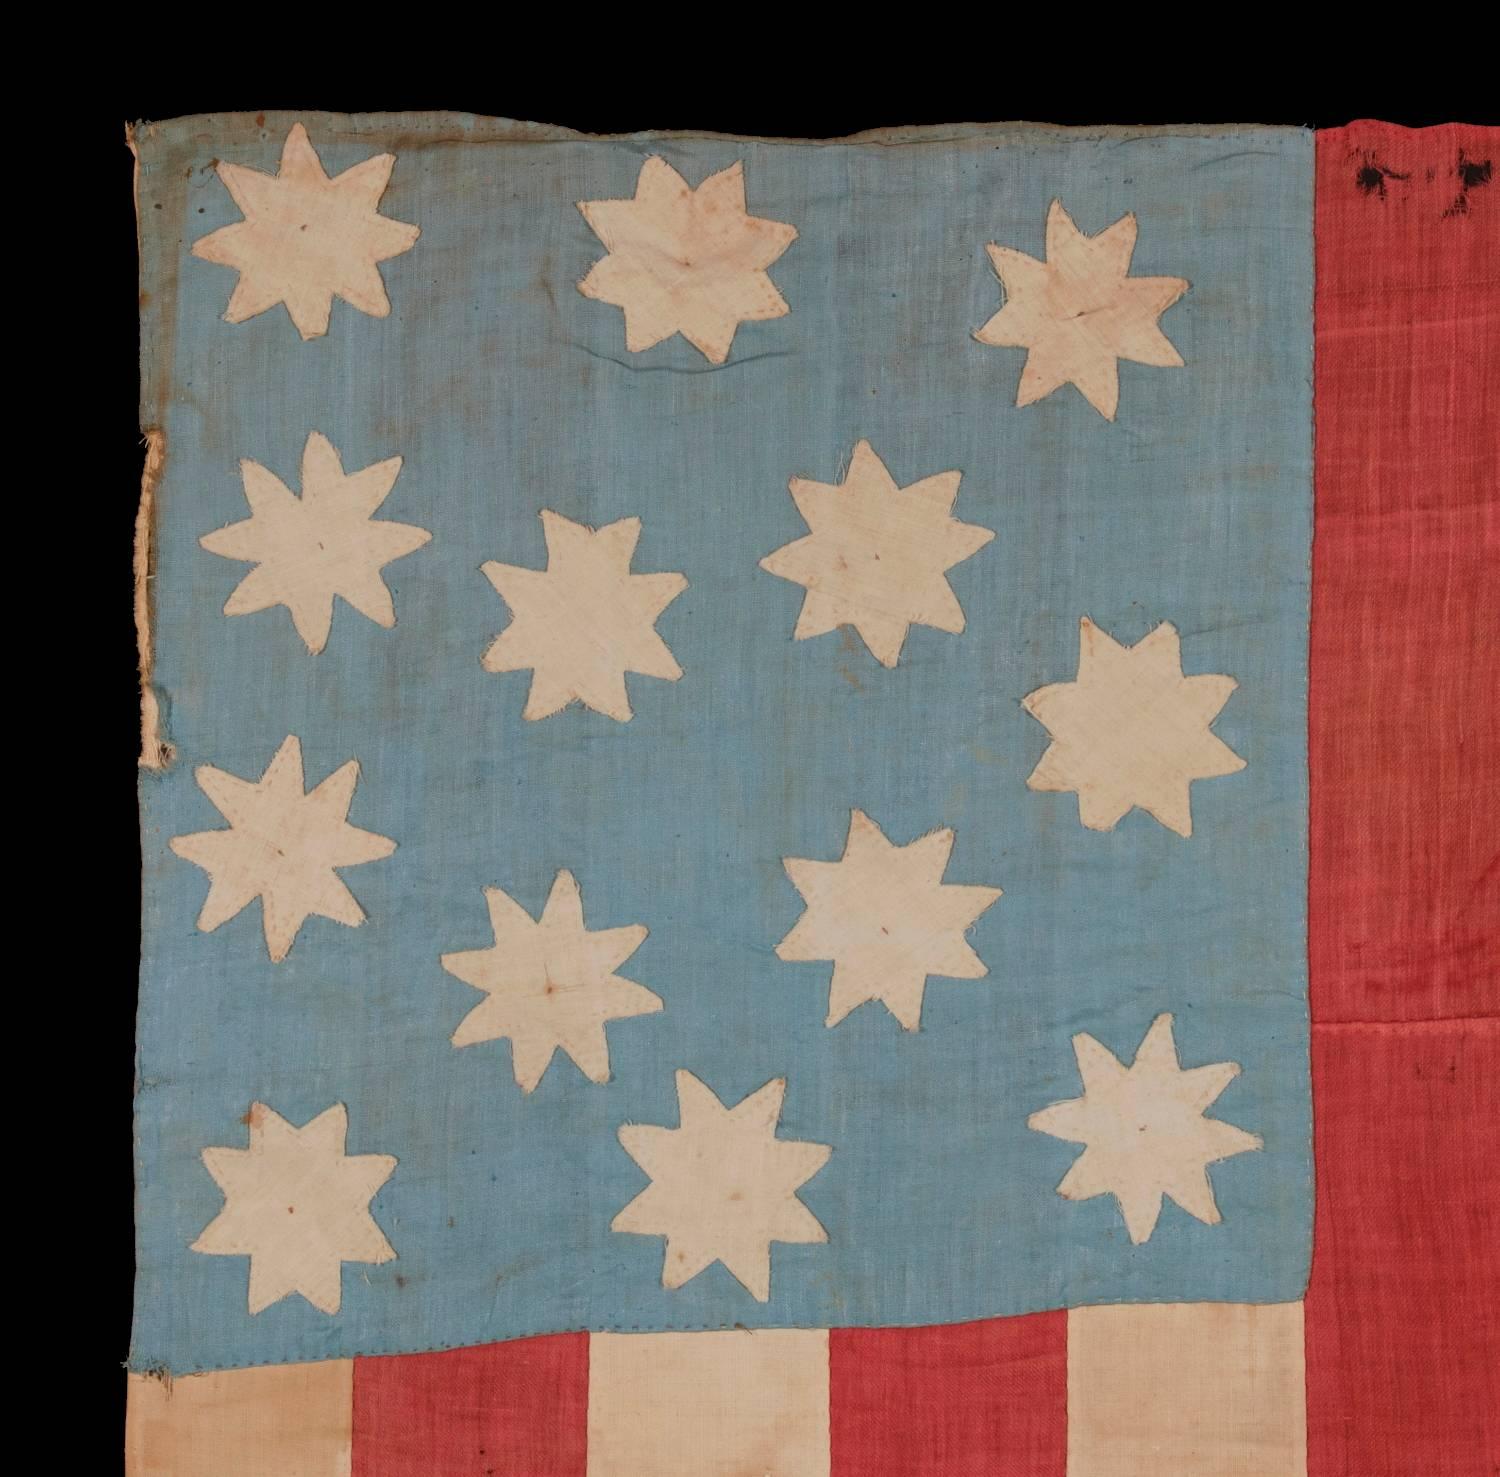 Extraordinary, hand-sewn, 13 star American national flag with 8-pointed stars on a glazed cotton, cornflower blue, 12 stripes and its canton resting on the war stripe, found in upstate, New York, pre-civil war, circa 1830-1850.

Homemade and